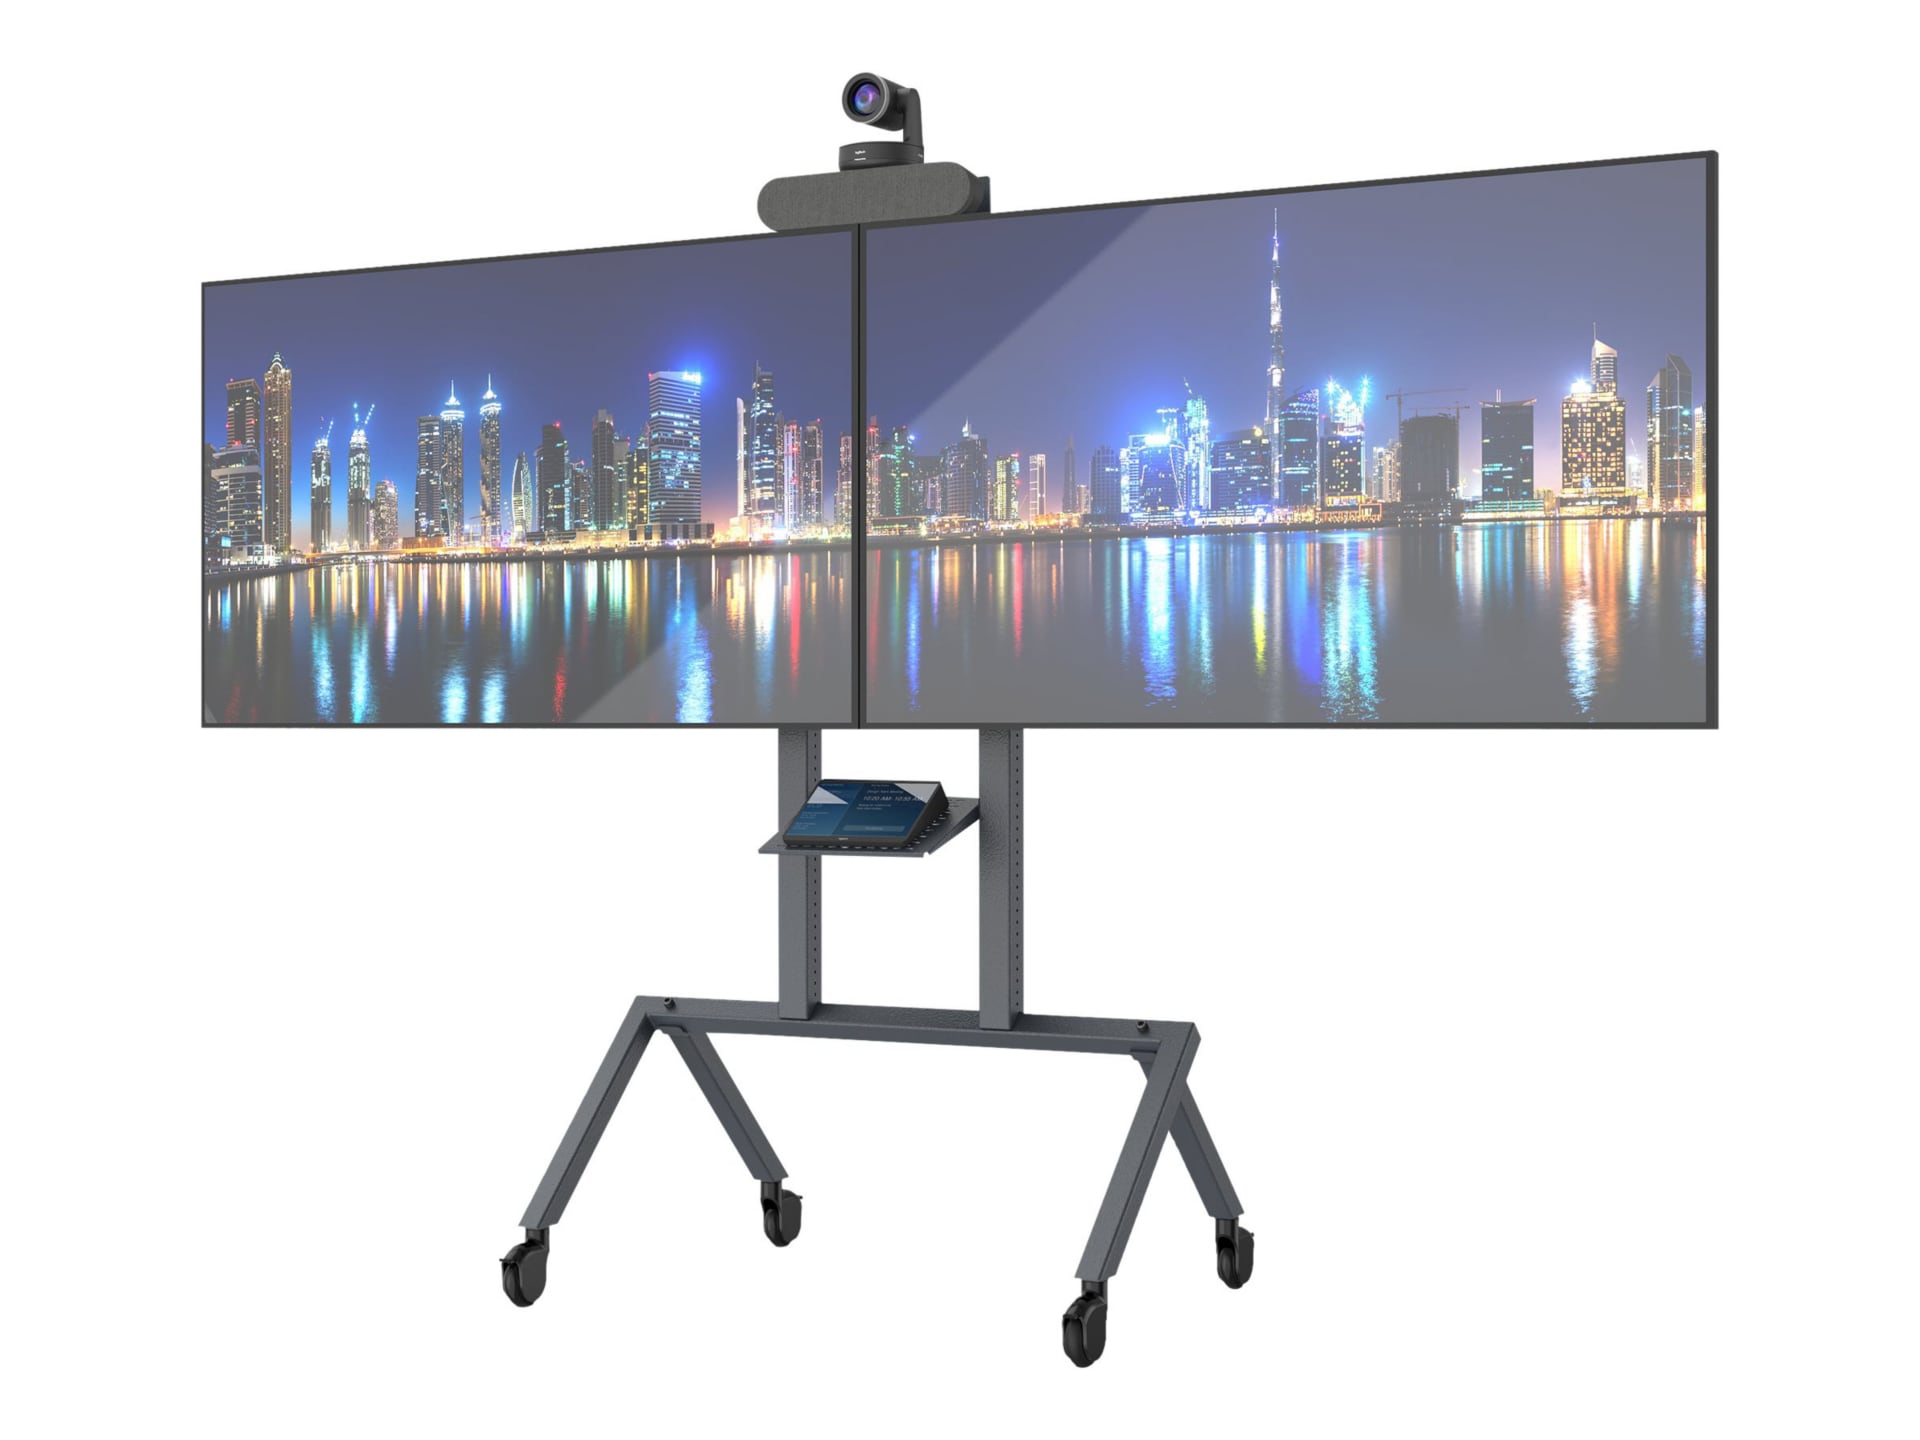 Heckler H701 mounting component - for 2 LCD displays